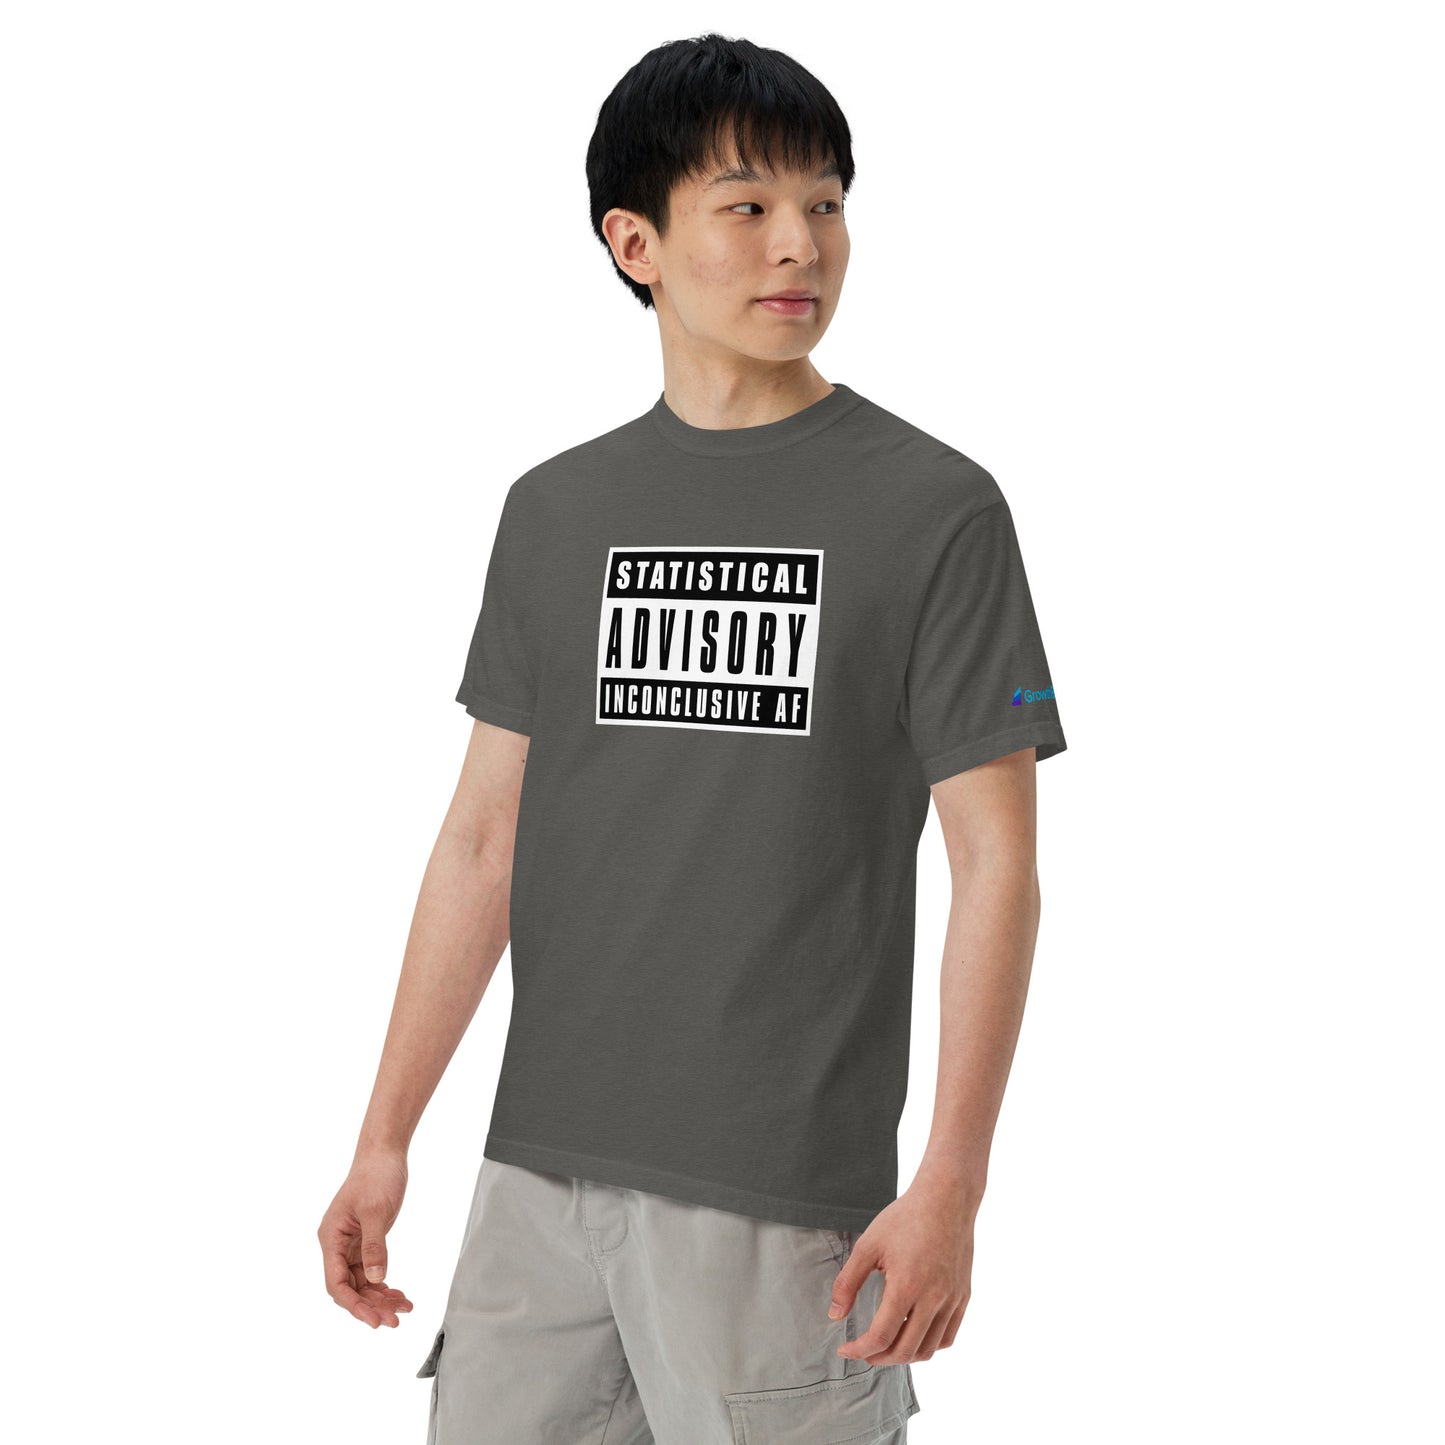 Statistical Advisory: Inconclusive AF - Unisex garment-dyed heavyweight t-shirt